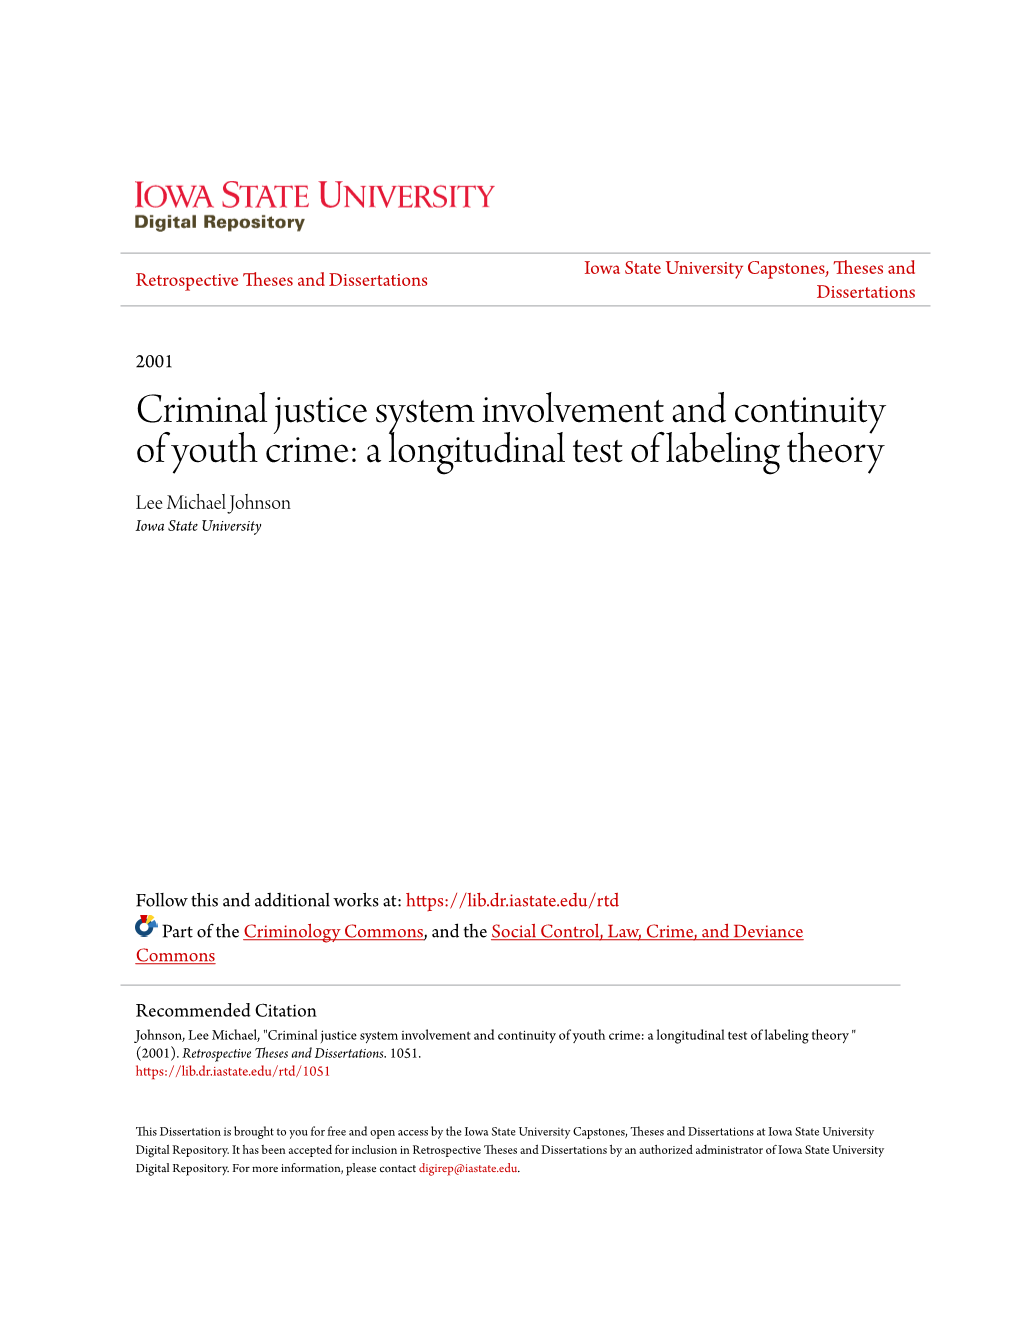 Criminal Justice System Involvement and Continuity of Youth Crime: a Longitudinal Test of Labeling Theory Lee Michael Johnson Iowa State University